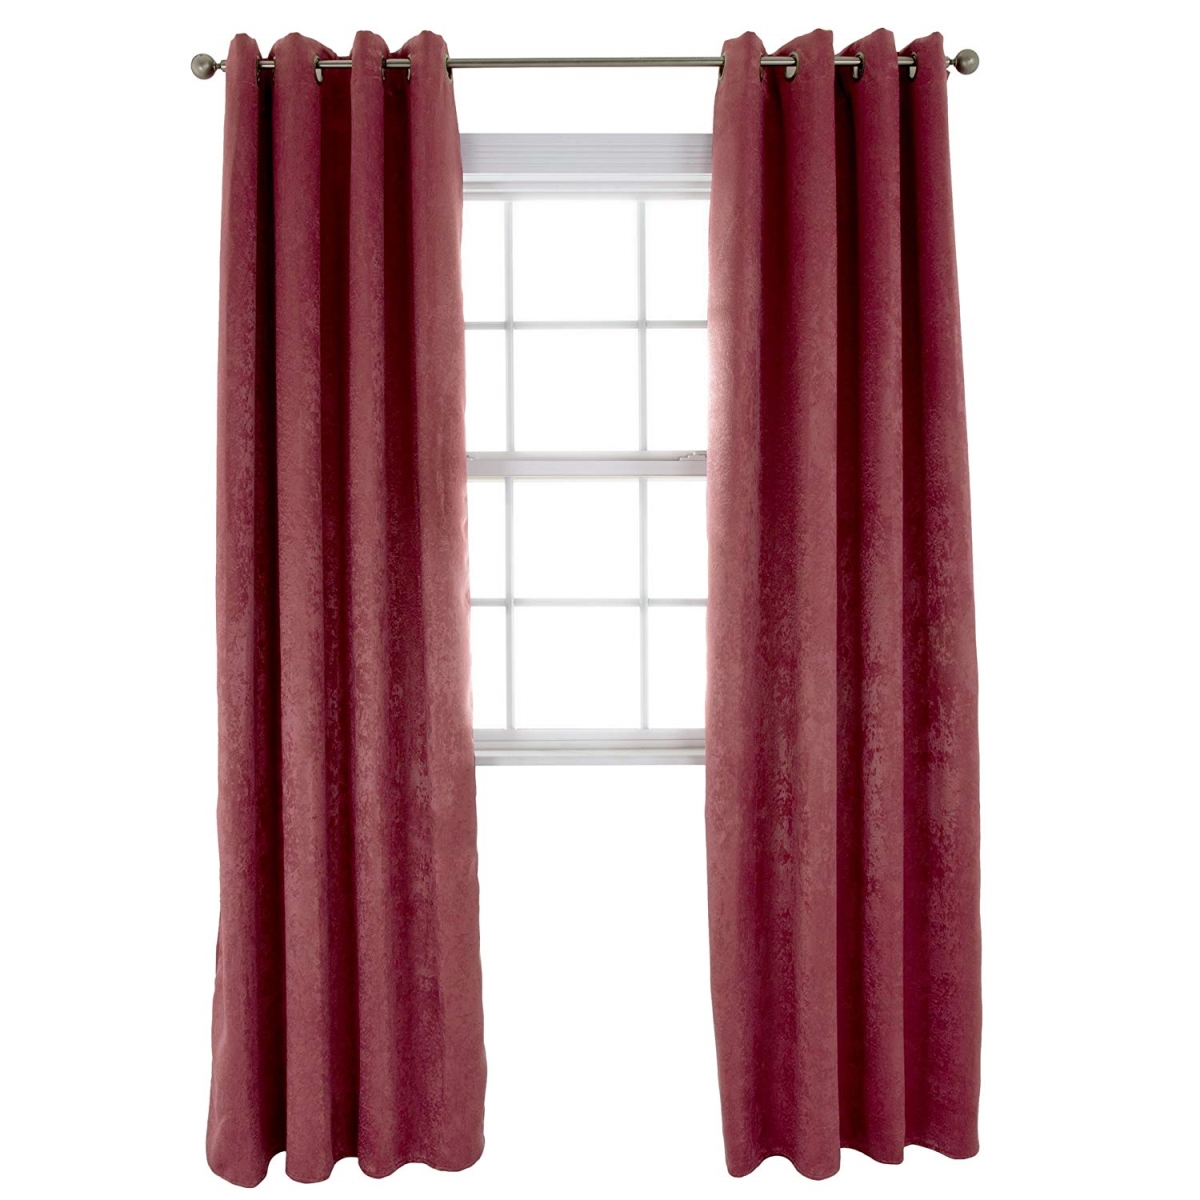 63a-43763 Mila Black Out Curtain Panel, Burgundy - 84 In.